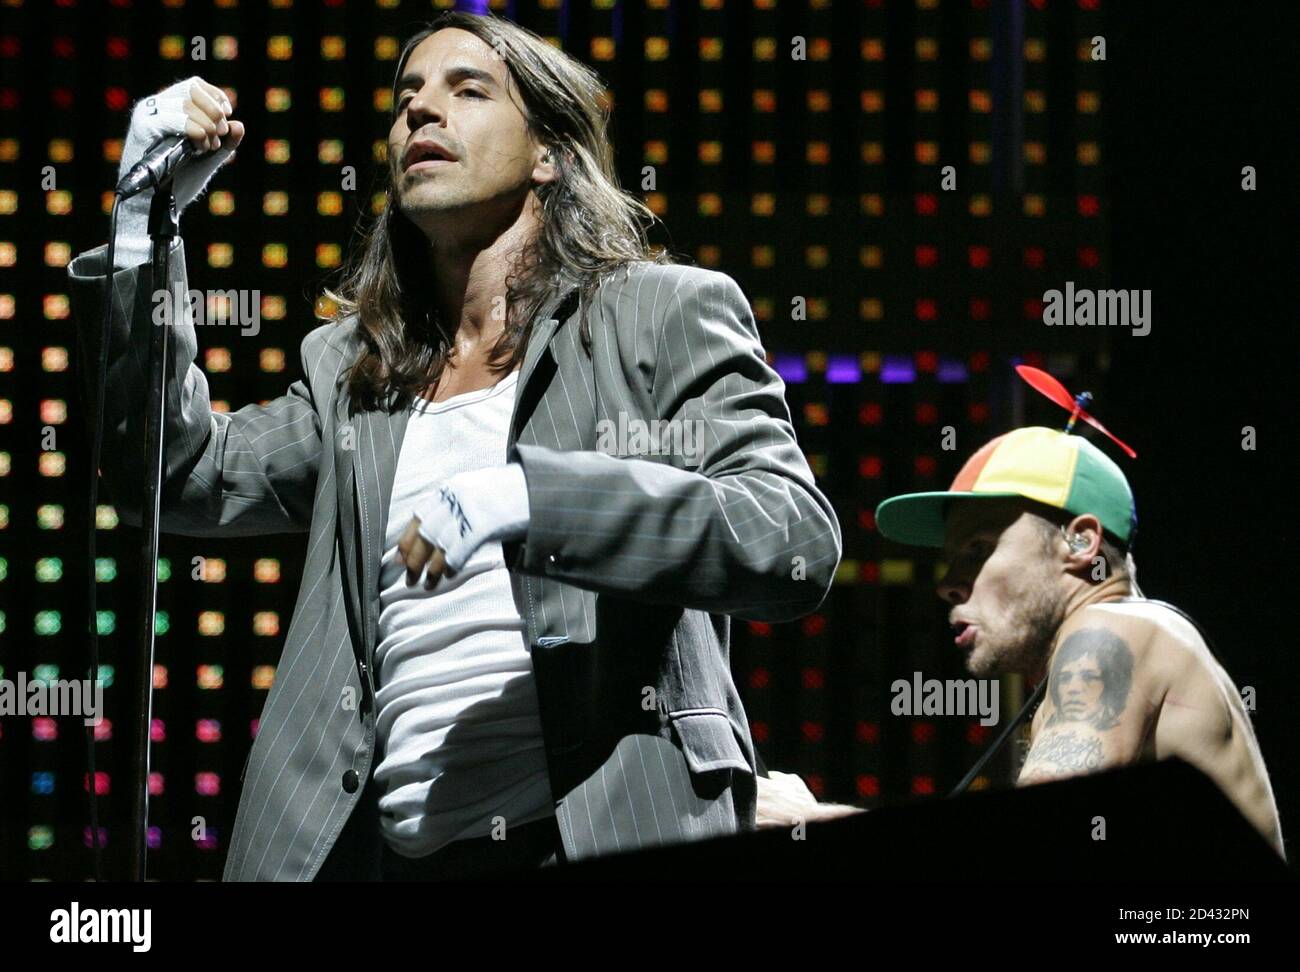 Anthony Kiedis (L) and Michael 'Flea' Balzary of the Red Hot Chili Peppers perform during a concert in Las Vegas, Nevada July 2, 2005. The Chili Peppers and alternative-rock band Weezer performed in a free concert for over 50,000 fans as part of the City of Las Vegas' centennial celebrations.  (CREDIT : REUTERS/Las Vegas Sun/Steve Marcus) Stock Photo